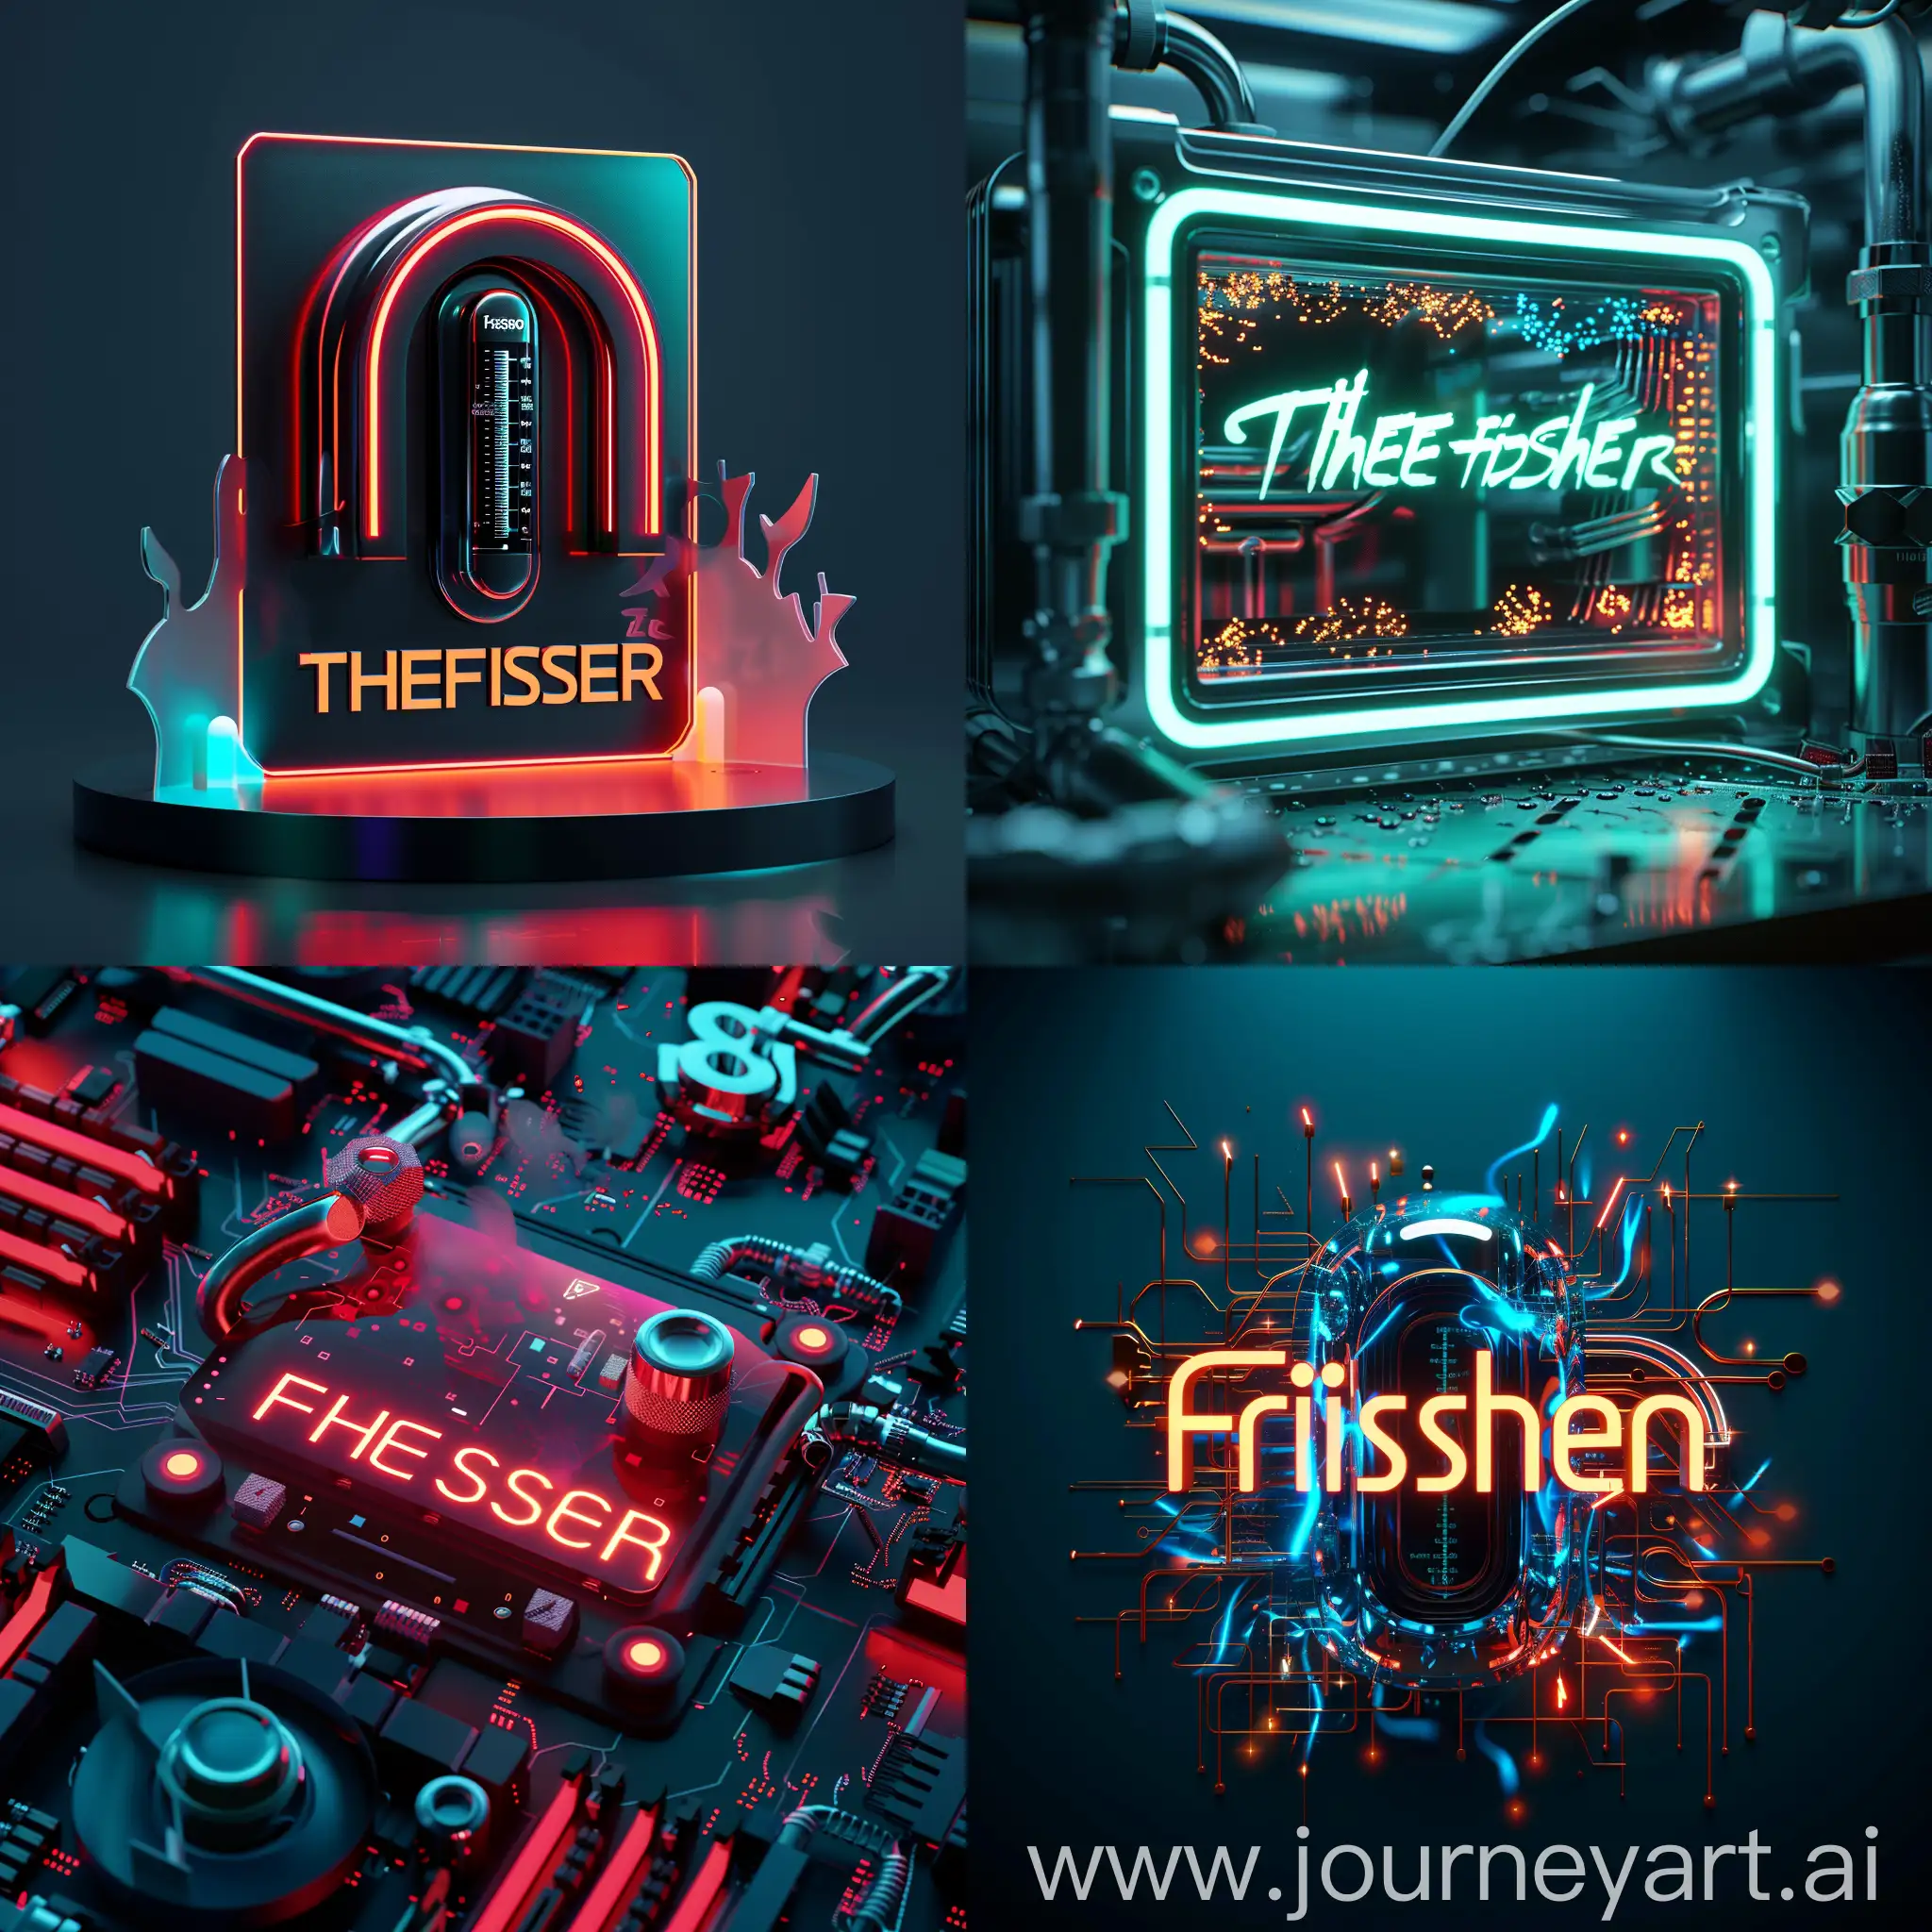 Bold-Promotional-Cyberpunk-Style-ThermoFisher-Display